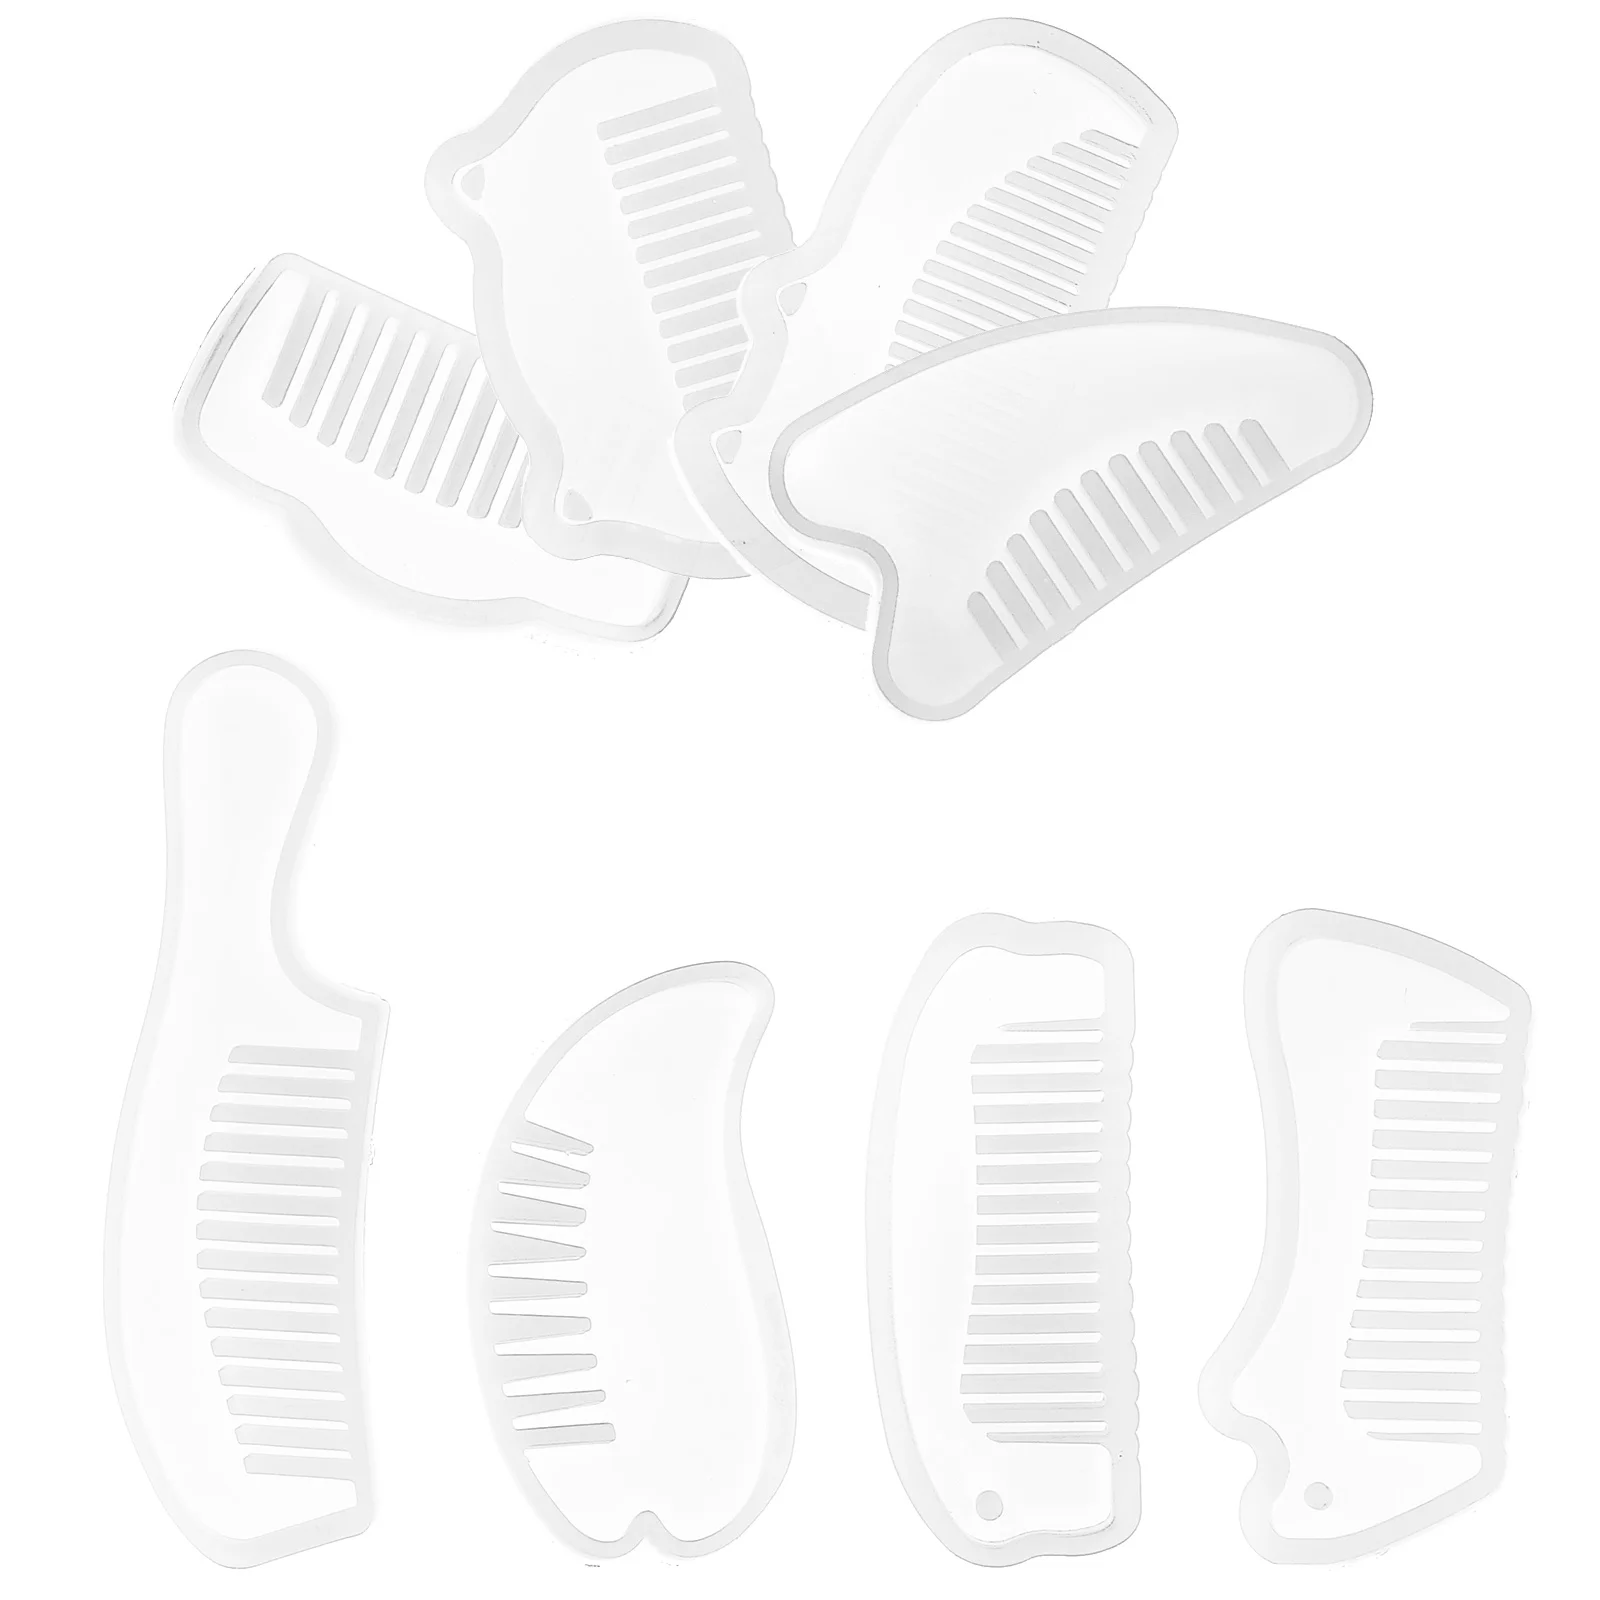 

8 Pcs Resin Mould DIY Crafts Mold Set Silicone Epoxy Casting Comb Crafting Silica Gel Molds Making